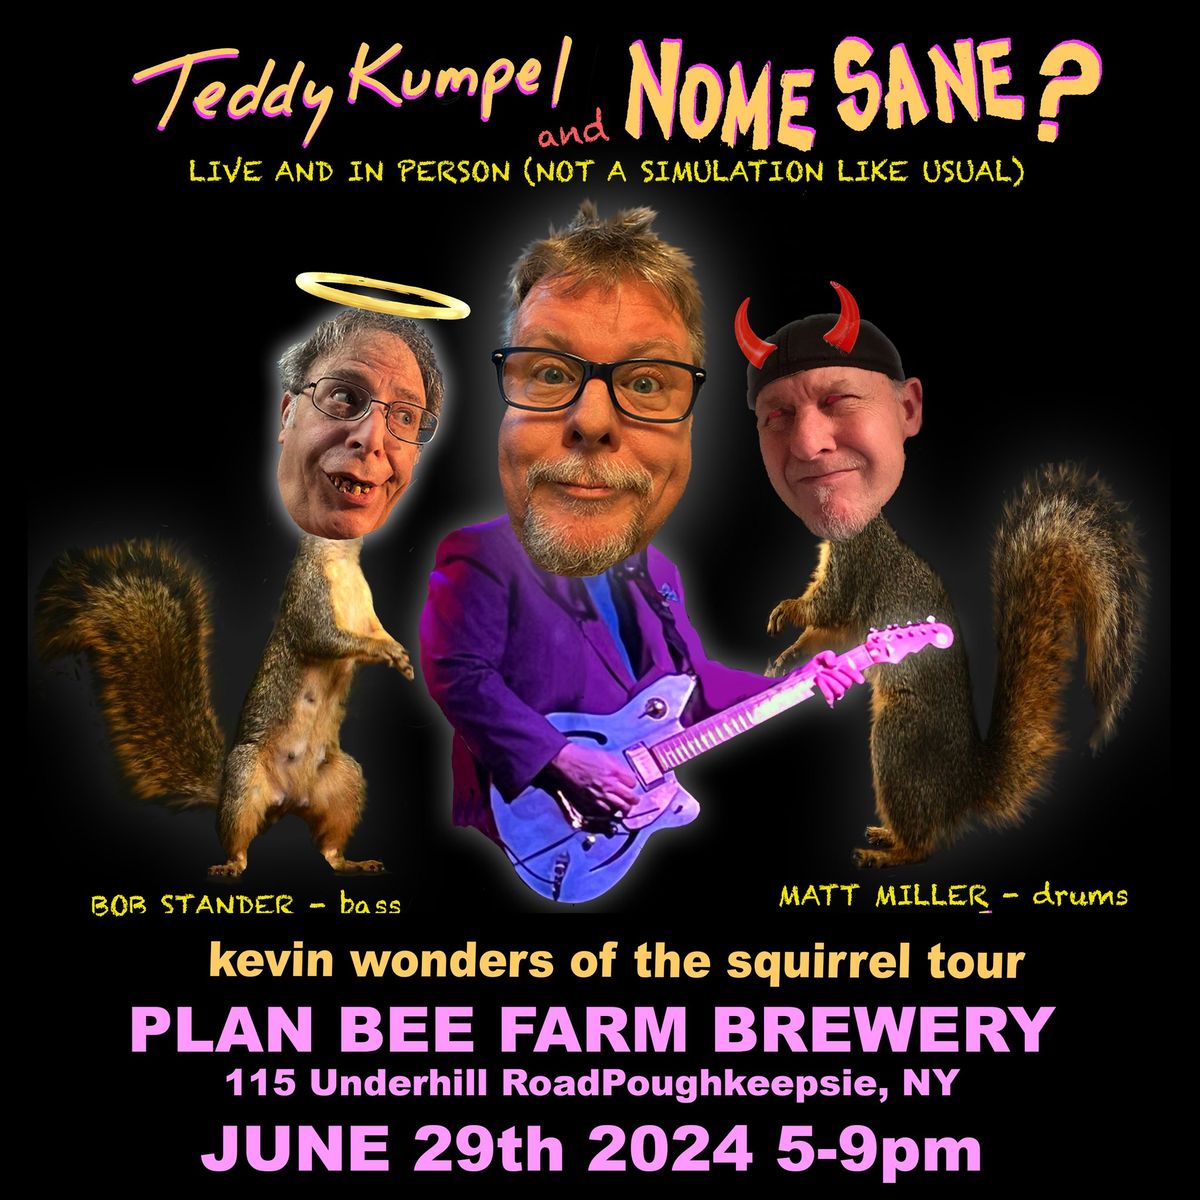 Teddy Kumpel and Nome Sane? at Plan Bee Farm Brewery